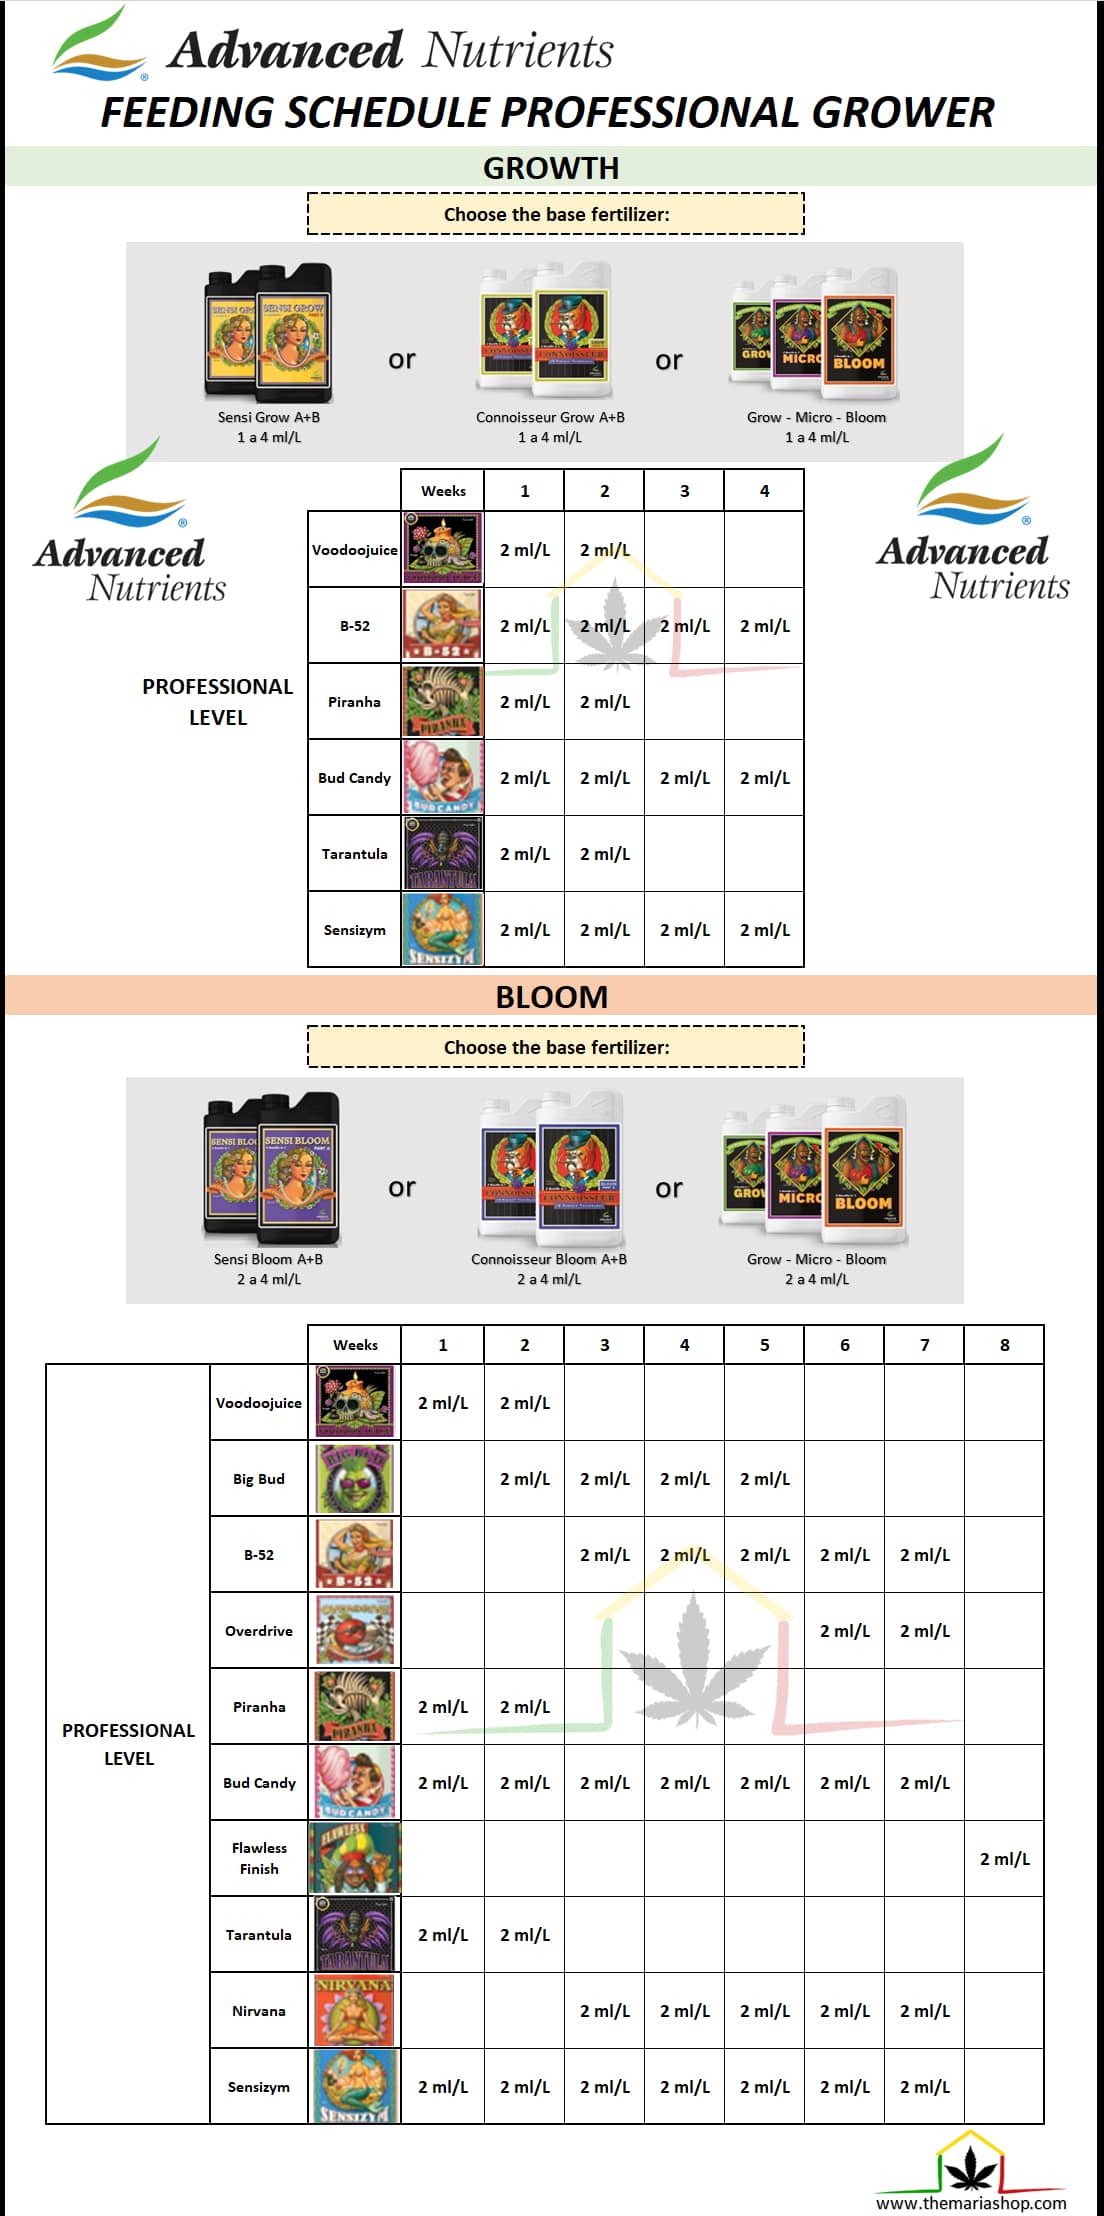 Advanced Nutrients Professional feed chart